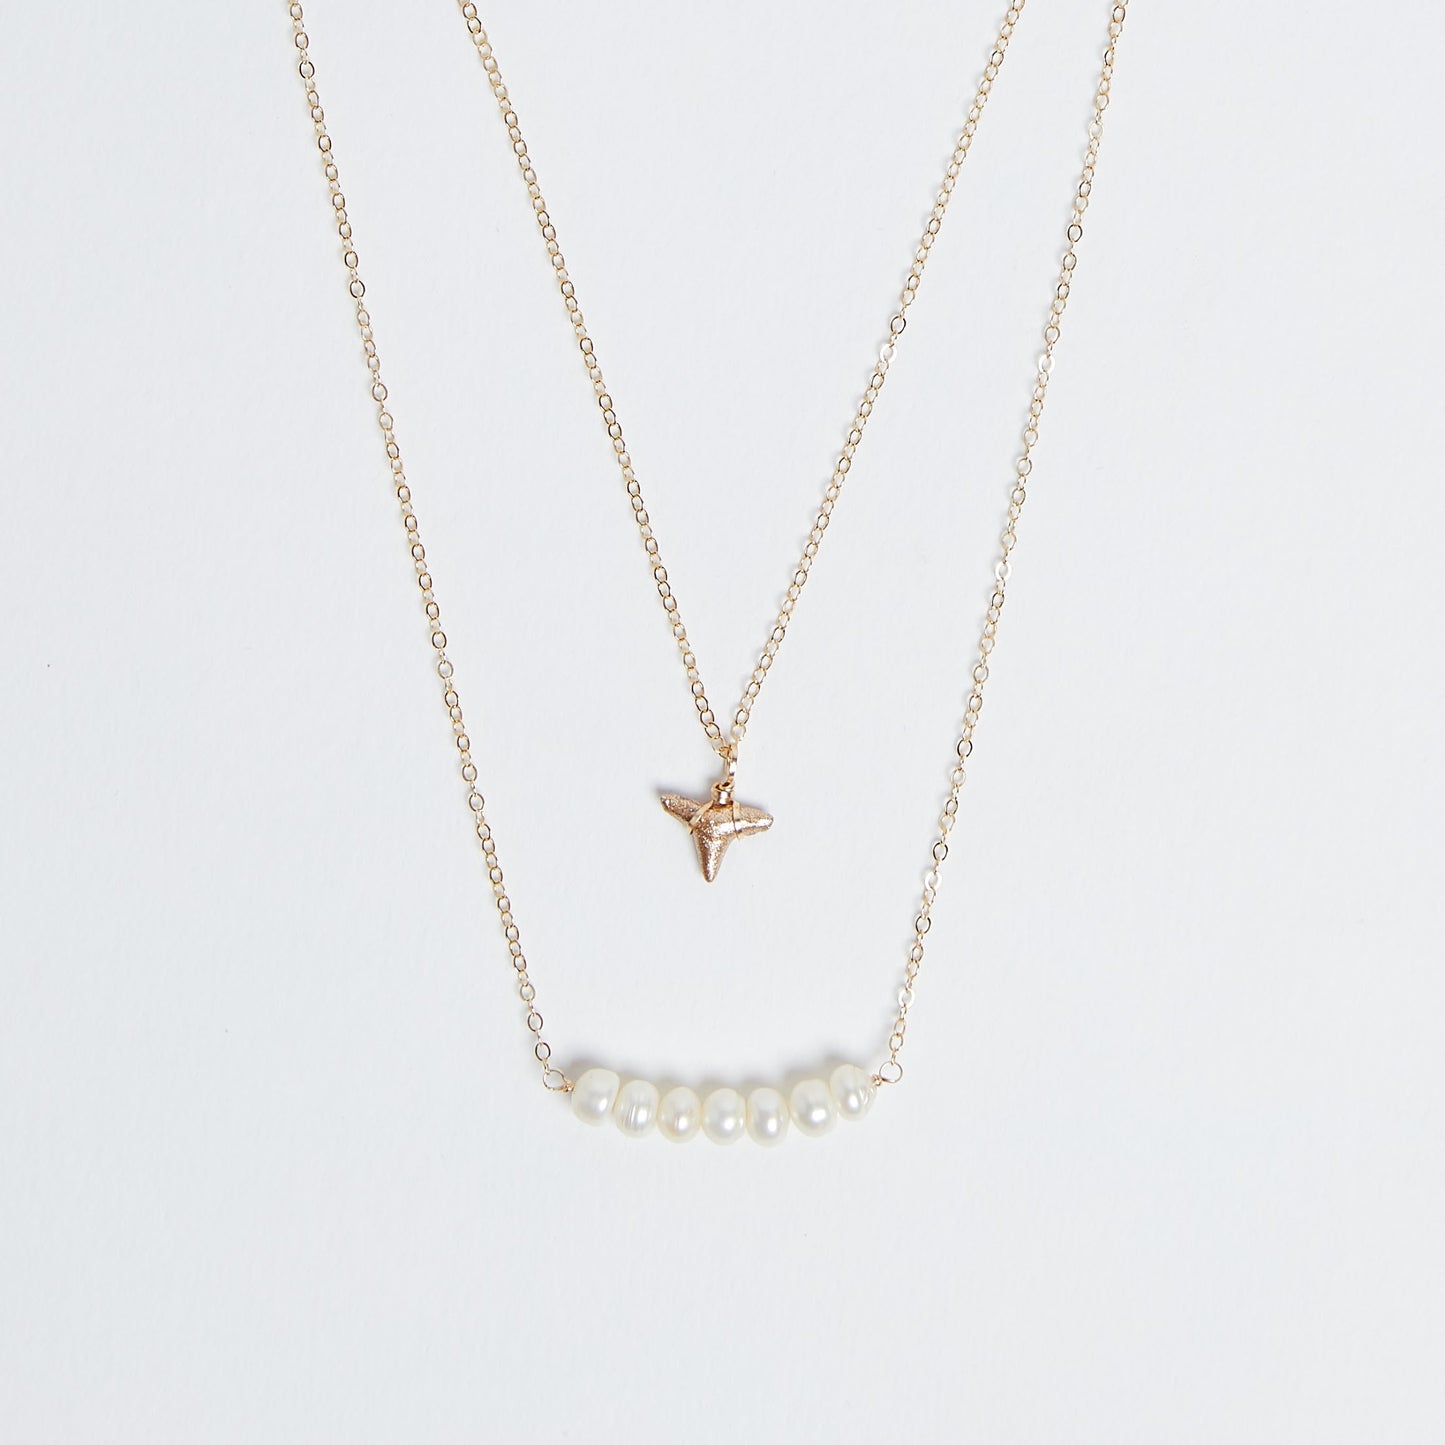 Saltwater Reign - Foxy Fossils double layer gold shark tooth necklace with freshwater pearls bar pendant